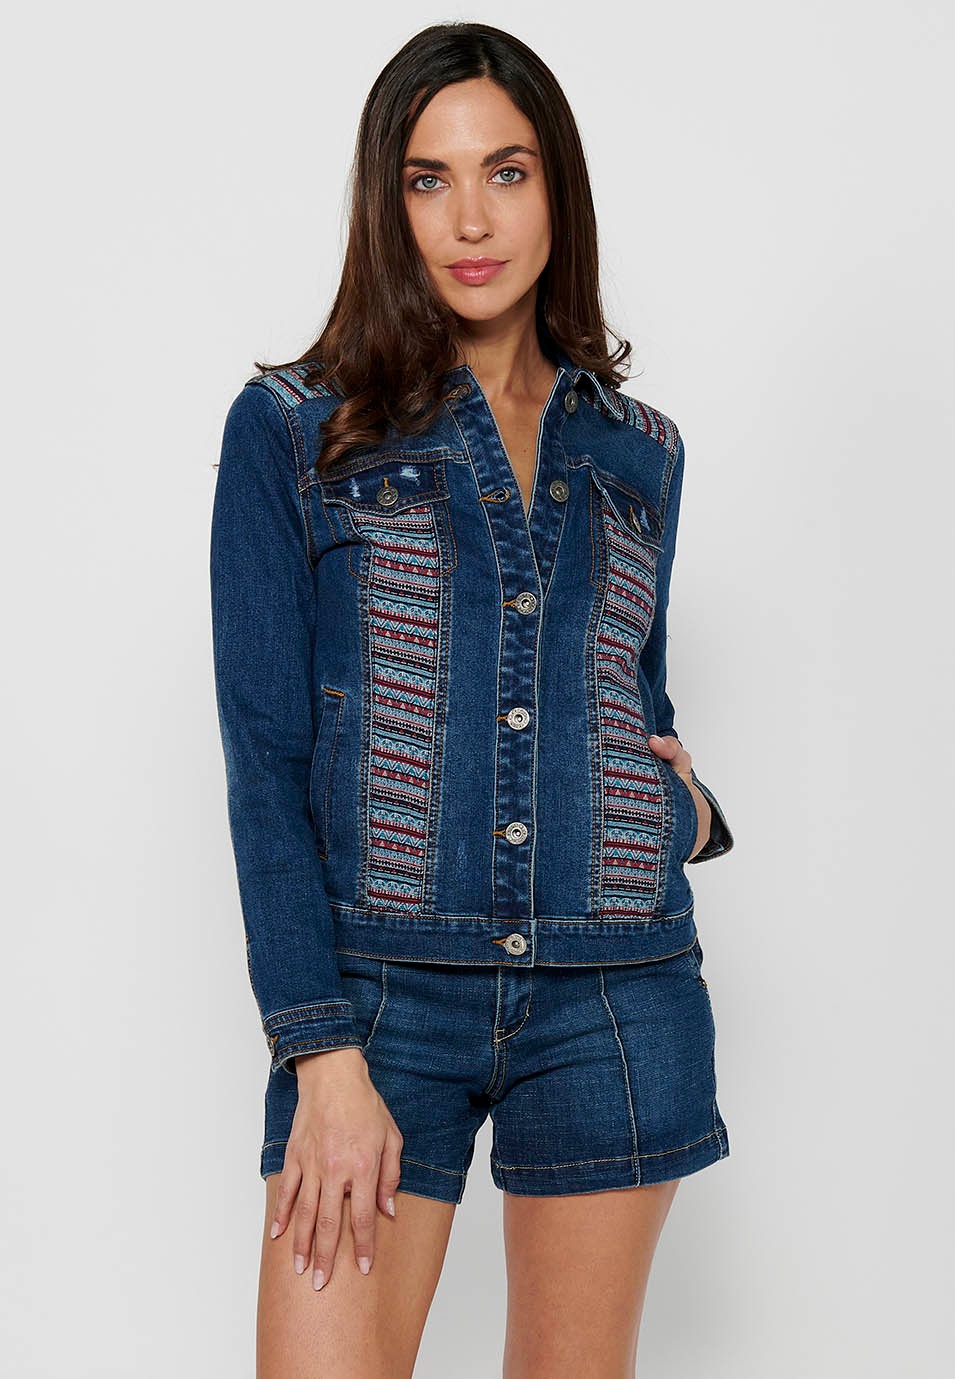 Long-sleeved denim jacket with ethnic fabric detail and front closure with blue buttons for women